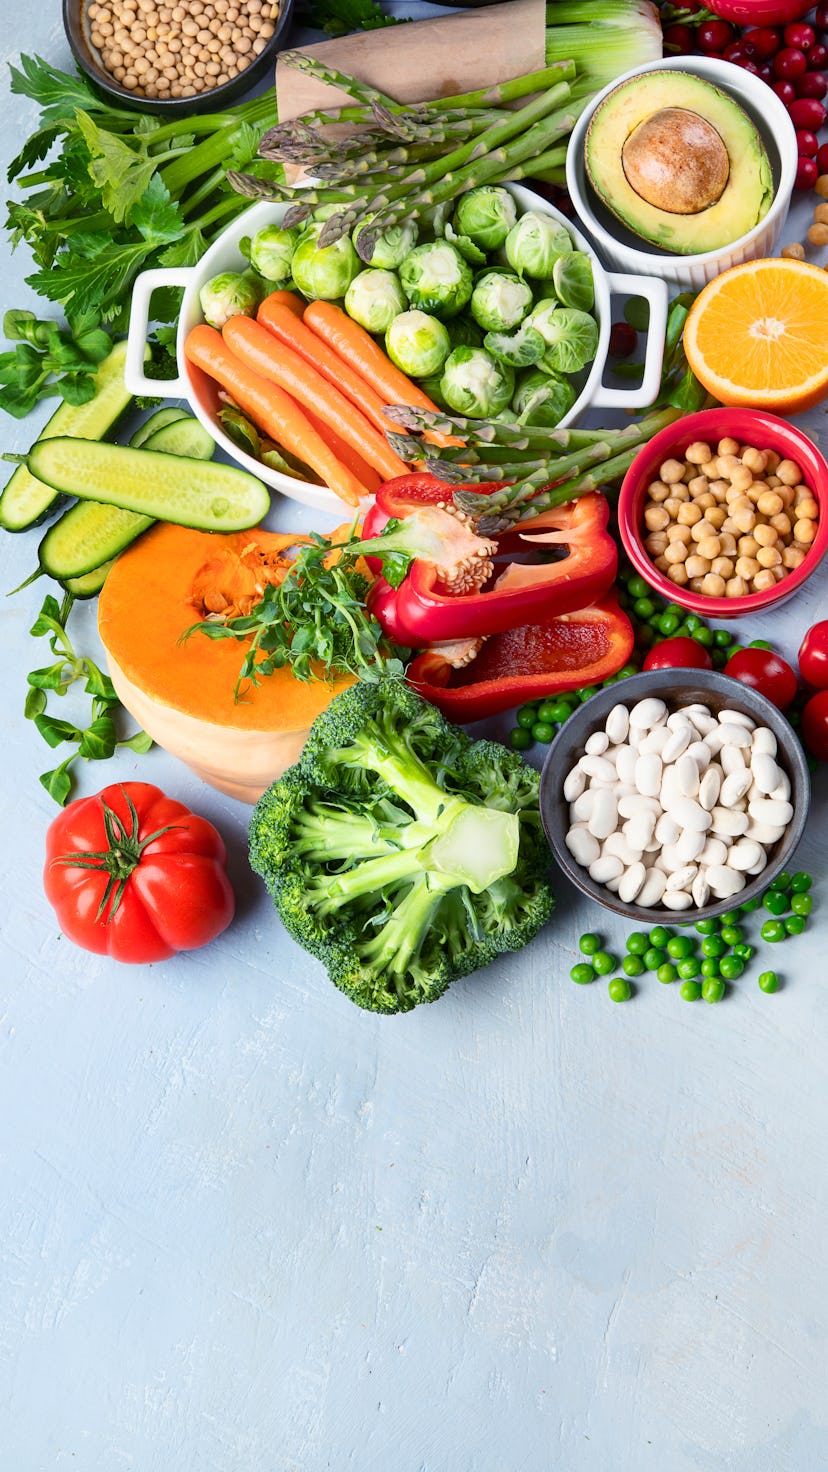 Raw and healthy plant-based foods, including red pepper, chickpeas, and carrots.